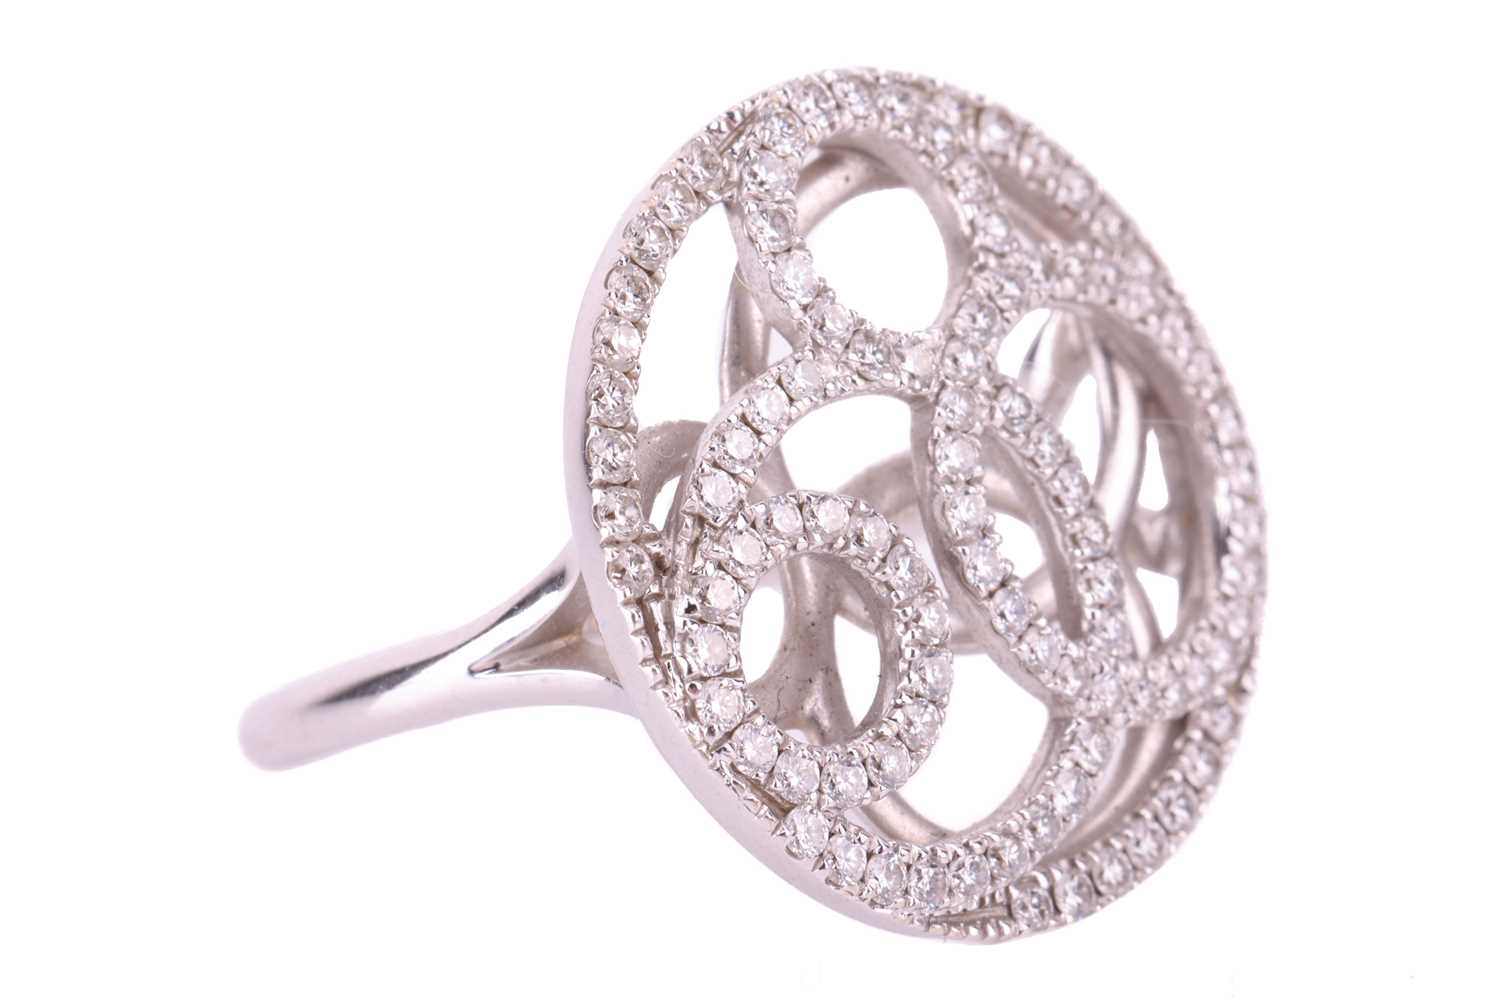 A De Beers pierced panel ring in 18ct white gold, round head of swirl design encrusted with brillian - Image 2 of 5